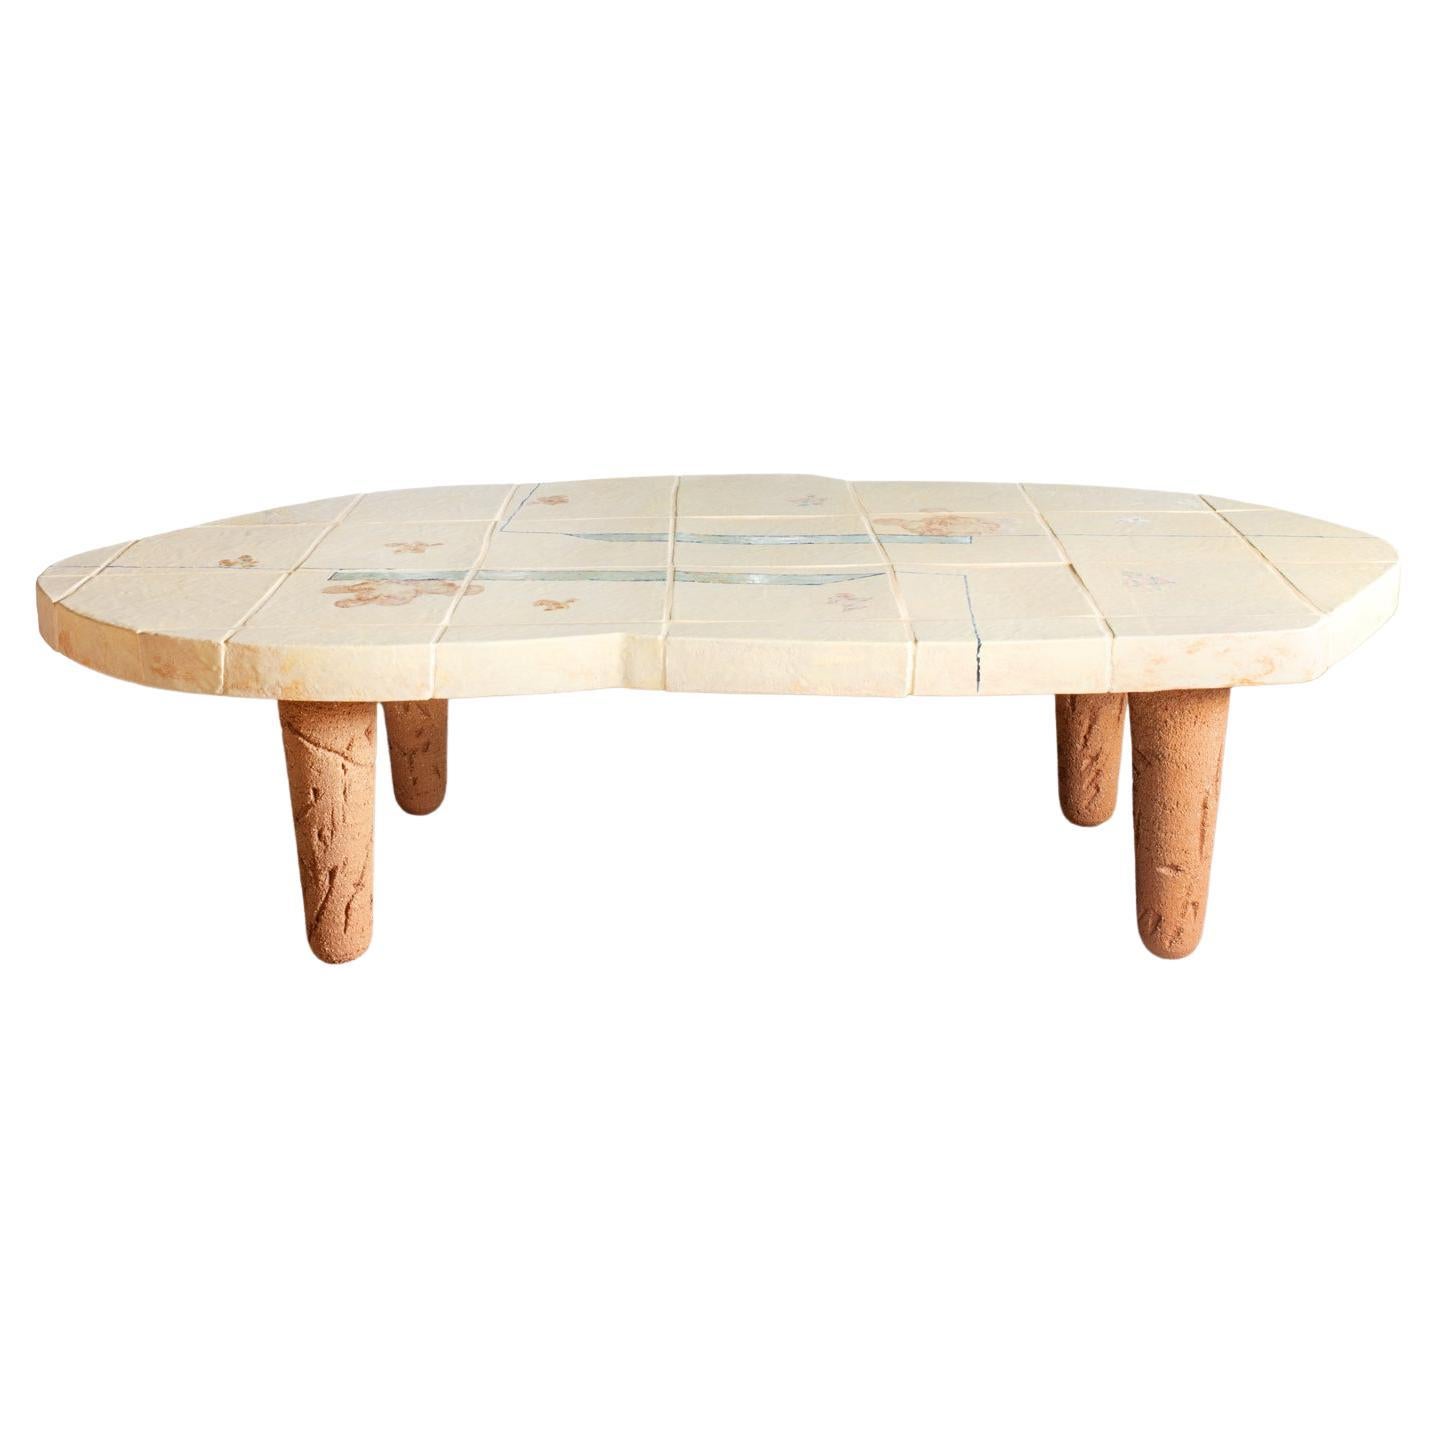 Glazed Stoneware Table with Geometric Decoration by Jean-Pierre Viot, 2023 For Sale